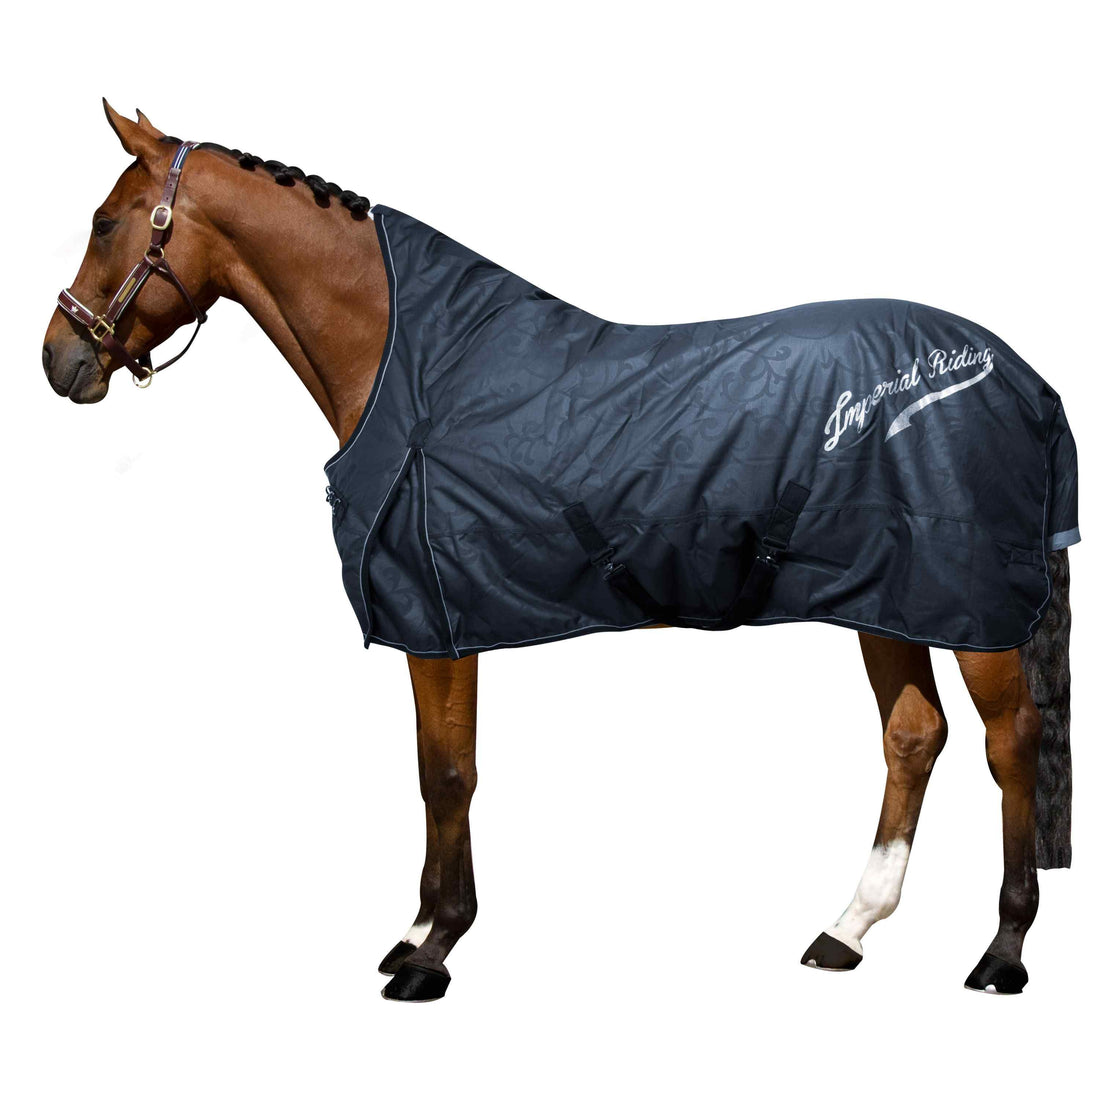 Imperial Riding - Outdoor blanket, Superdry, 300gr